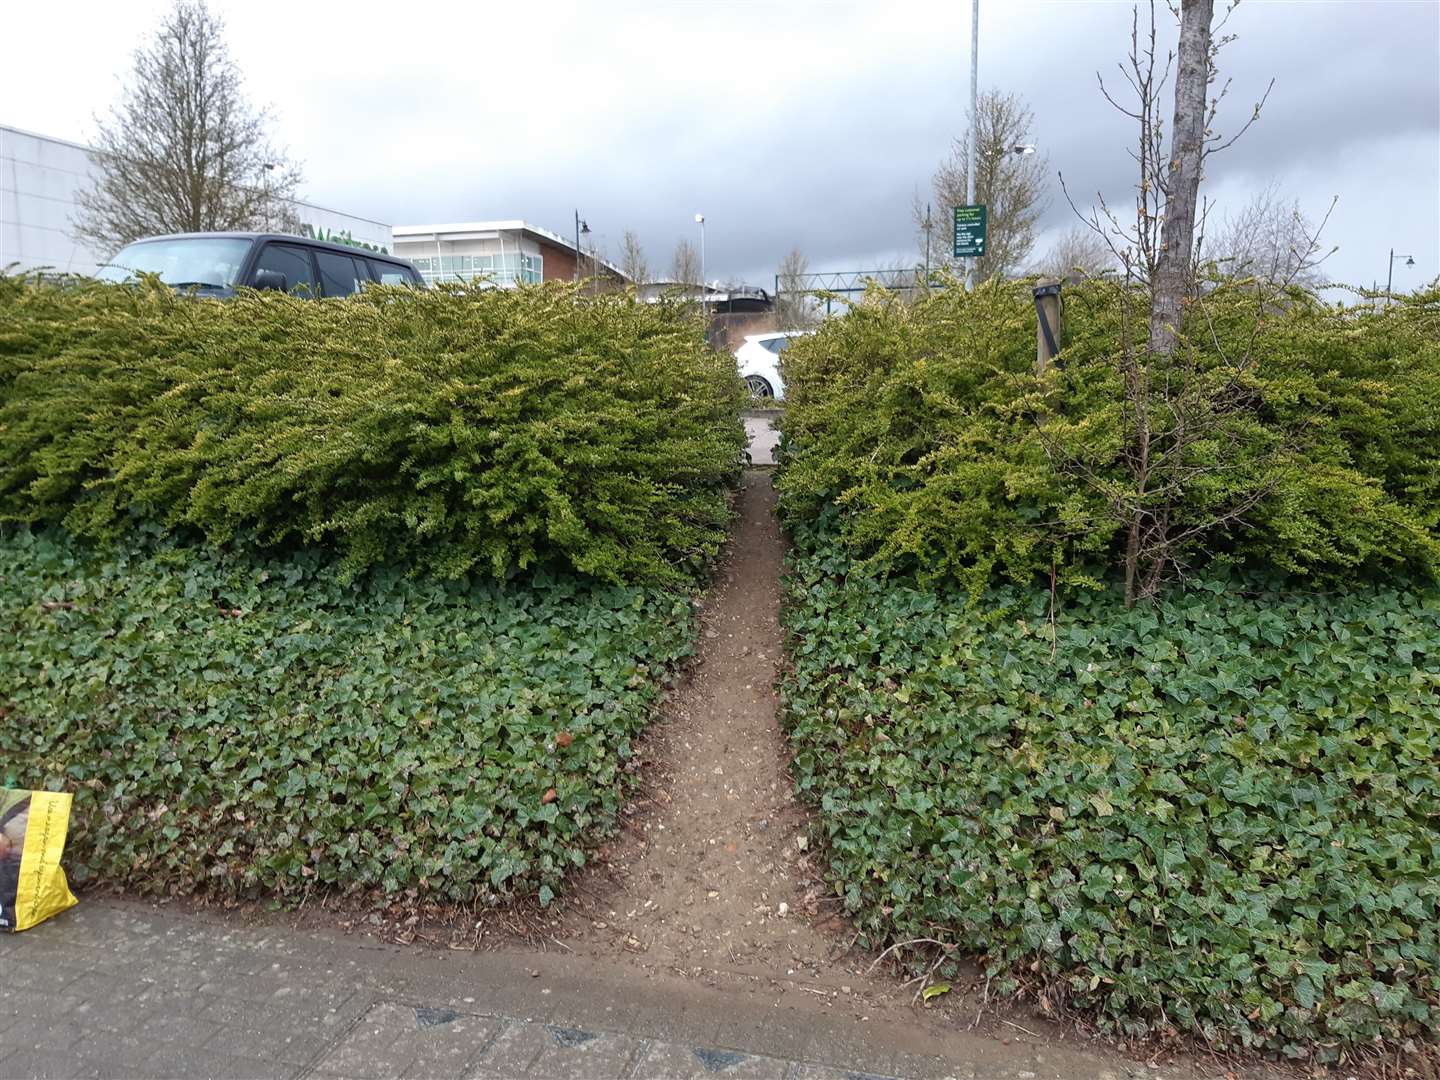 Shoppers have forced a path through the hedge to reach the Waitrose store at Kings Hill, but it is a steep bank